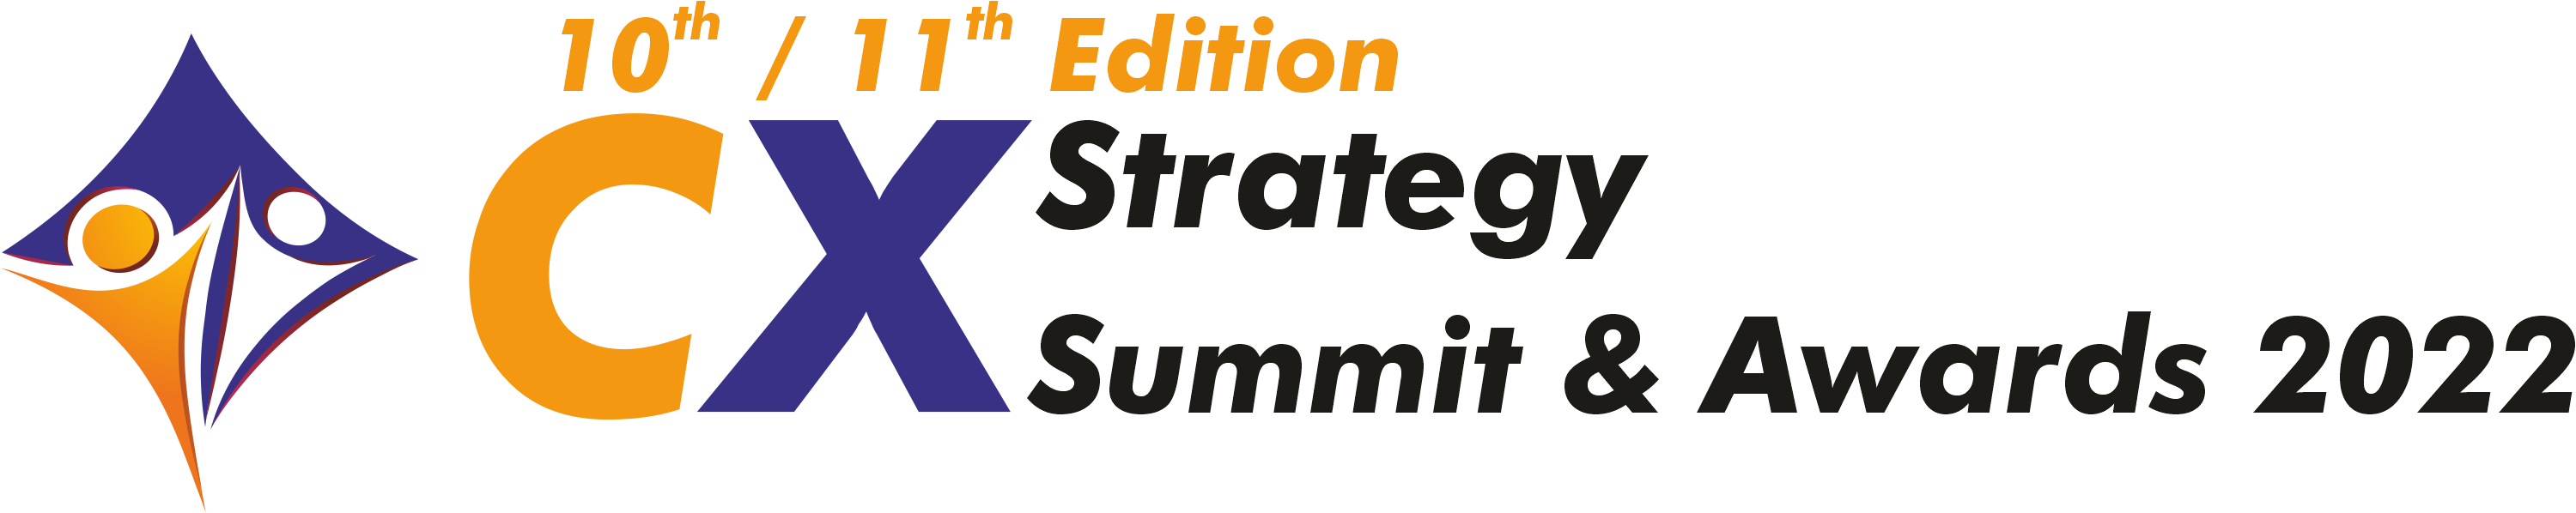 10th Edition CX Strategy Summit and Awards 2022